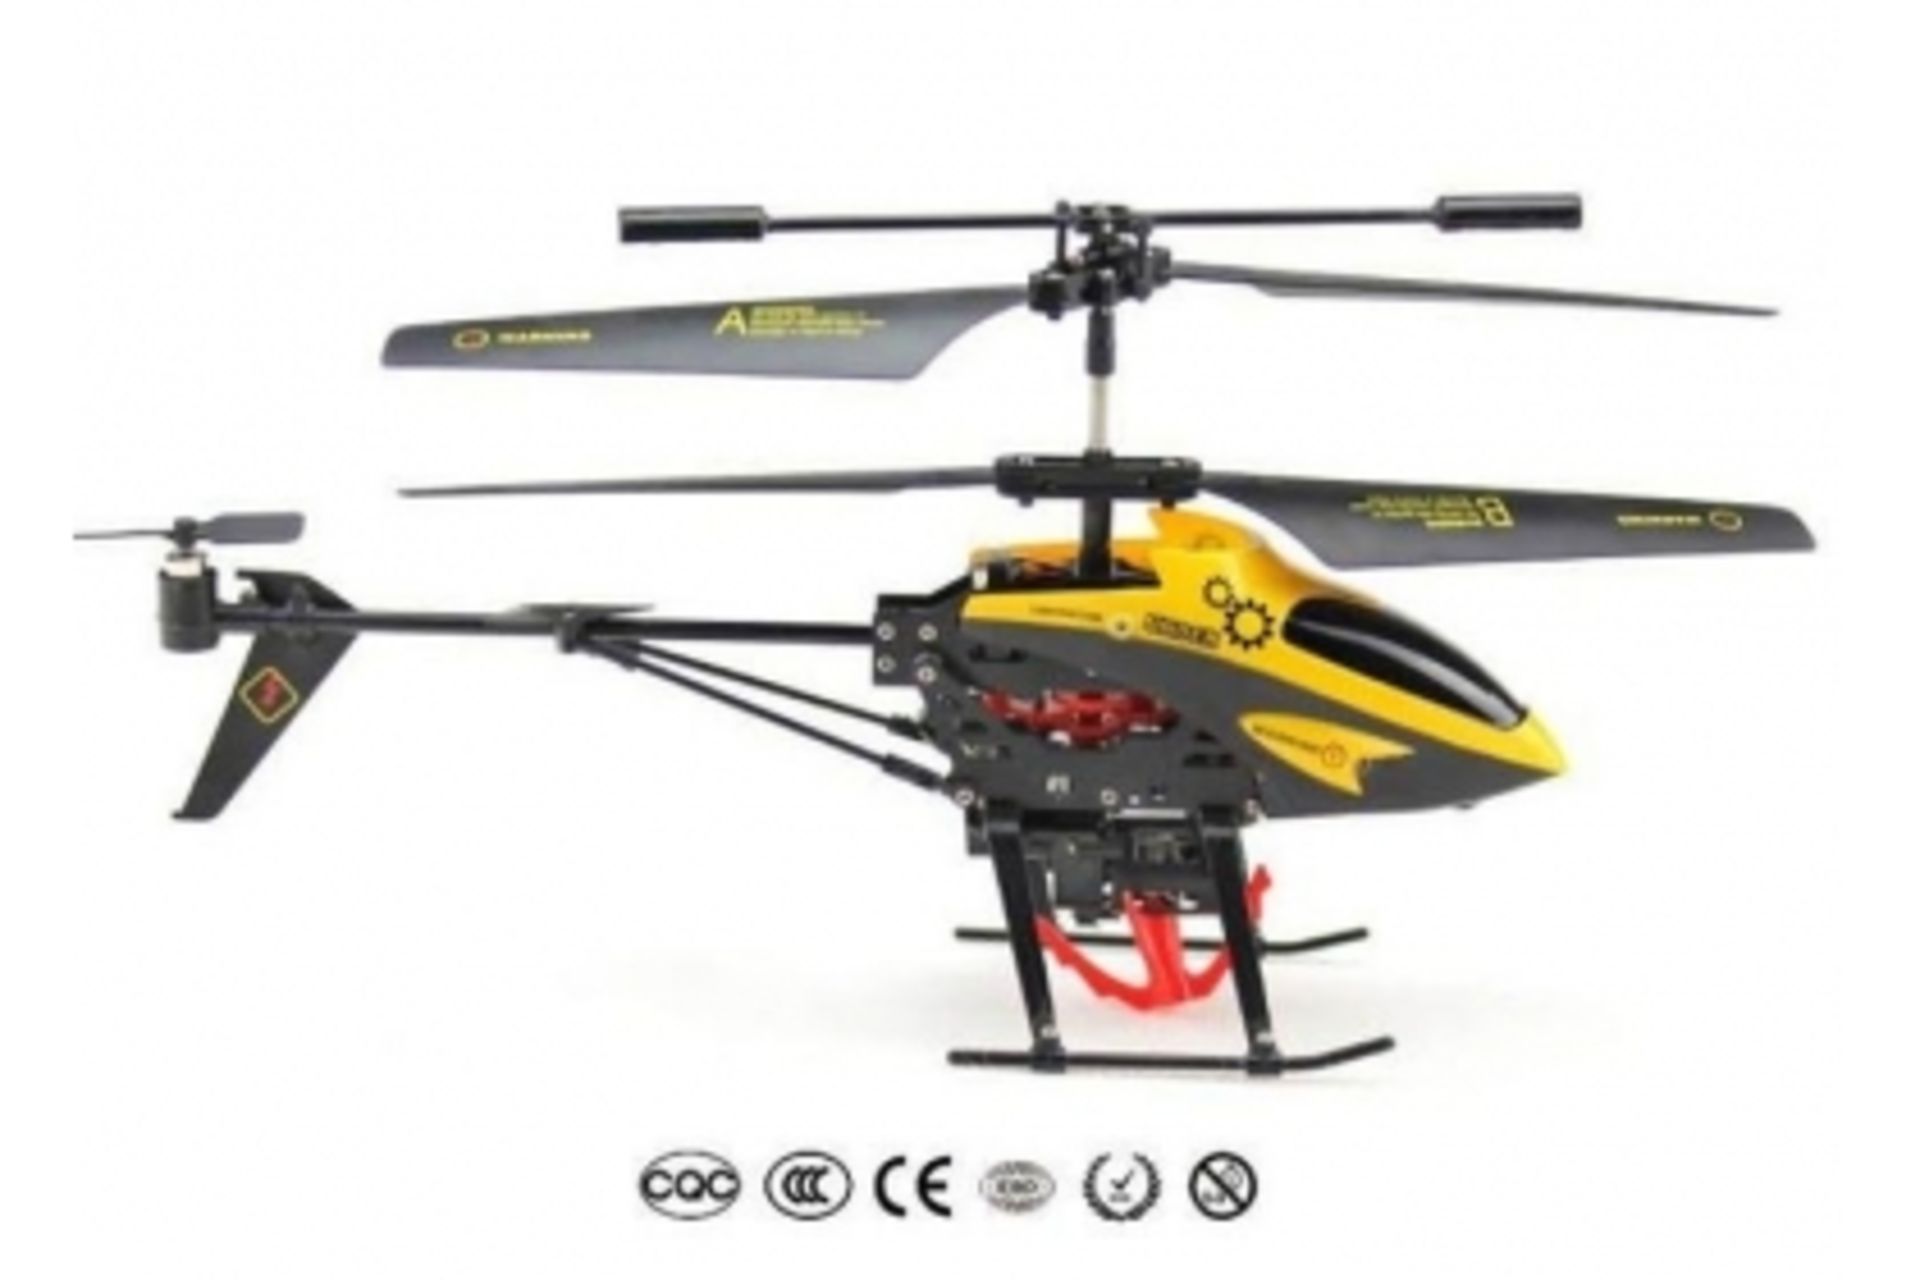 V Infrared controlled Cargo Helicopter RRP £79.99 With 3-channel gyro and trim active technology. - Image 6 of 6